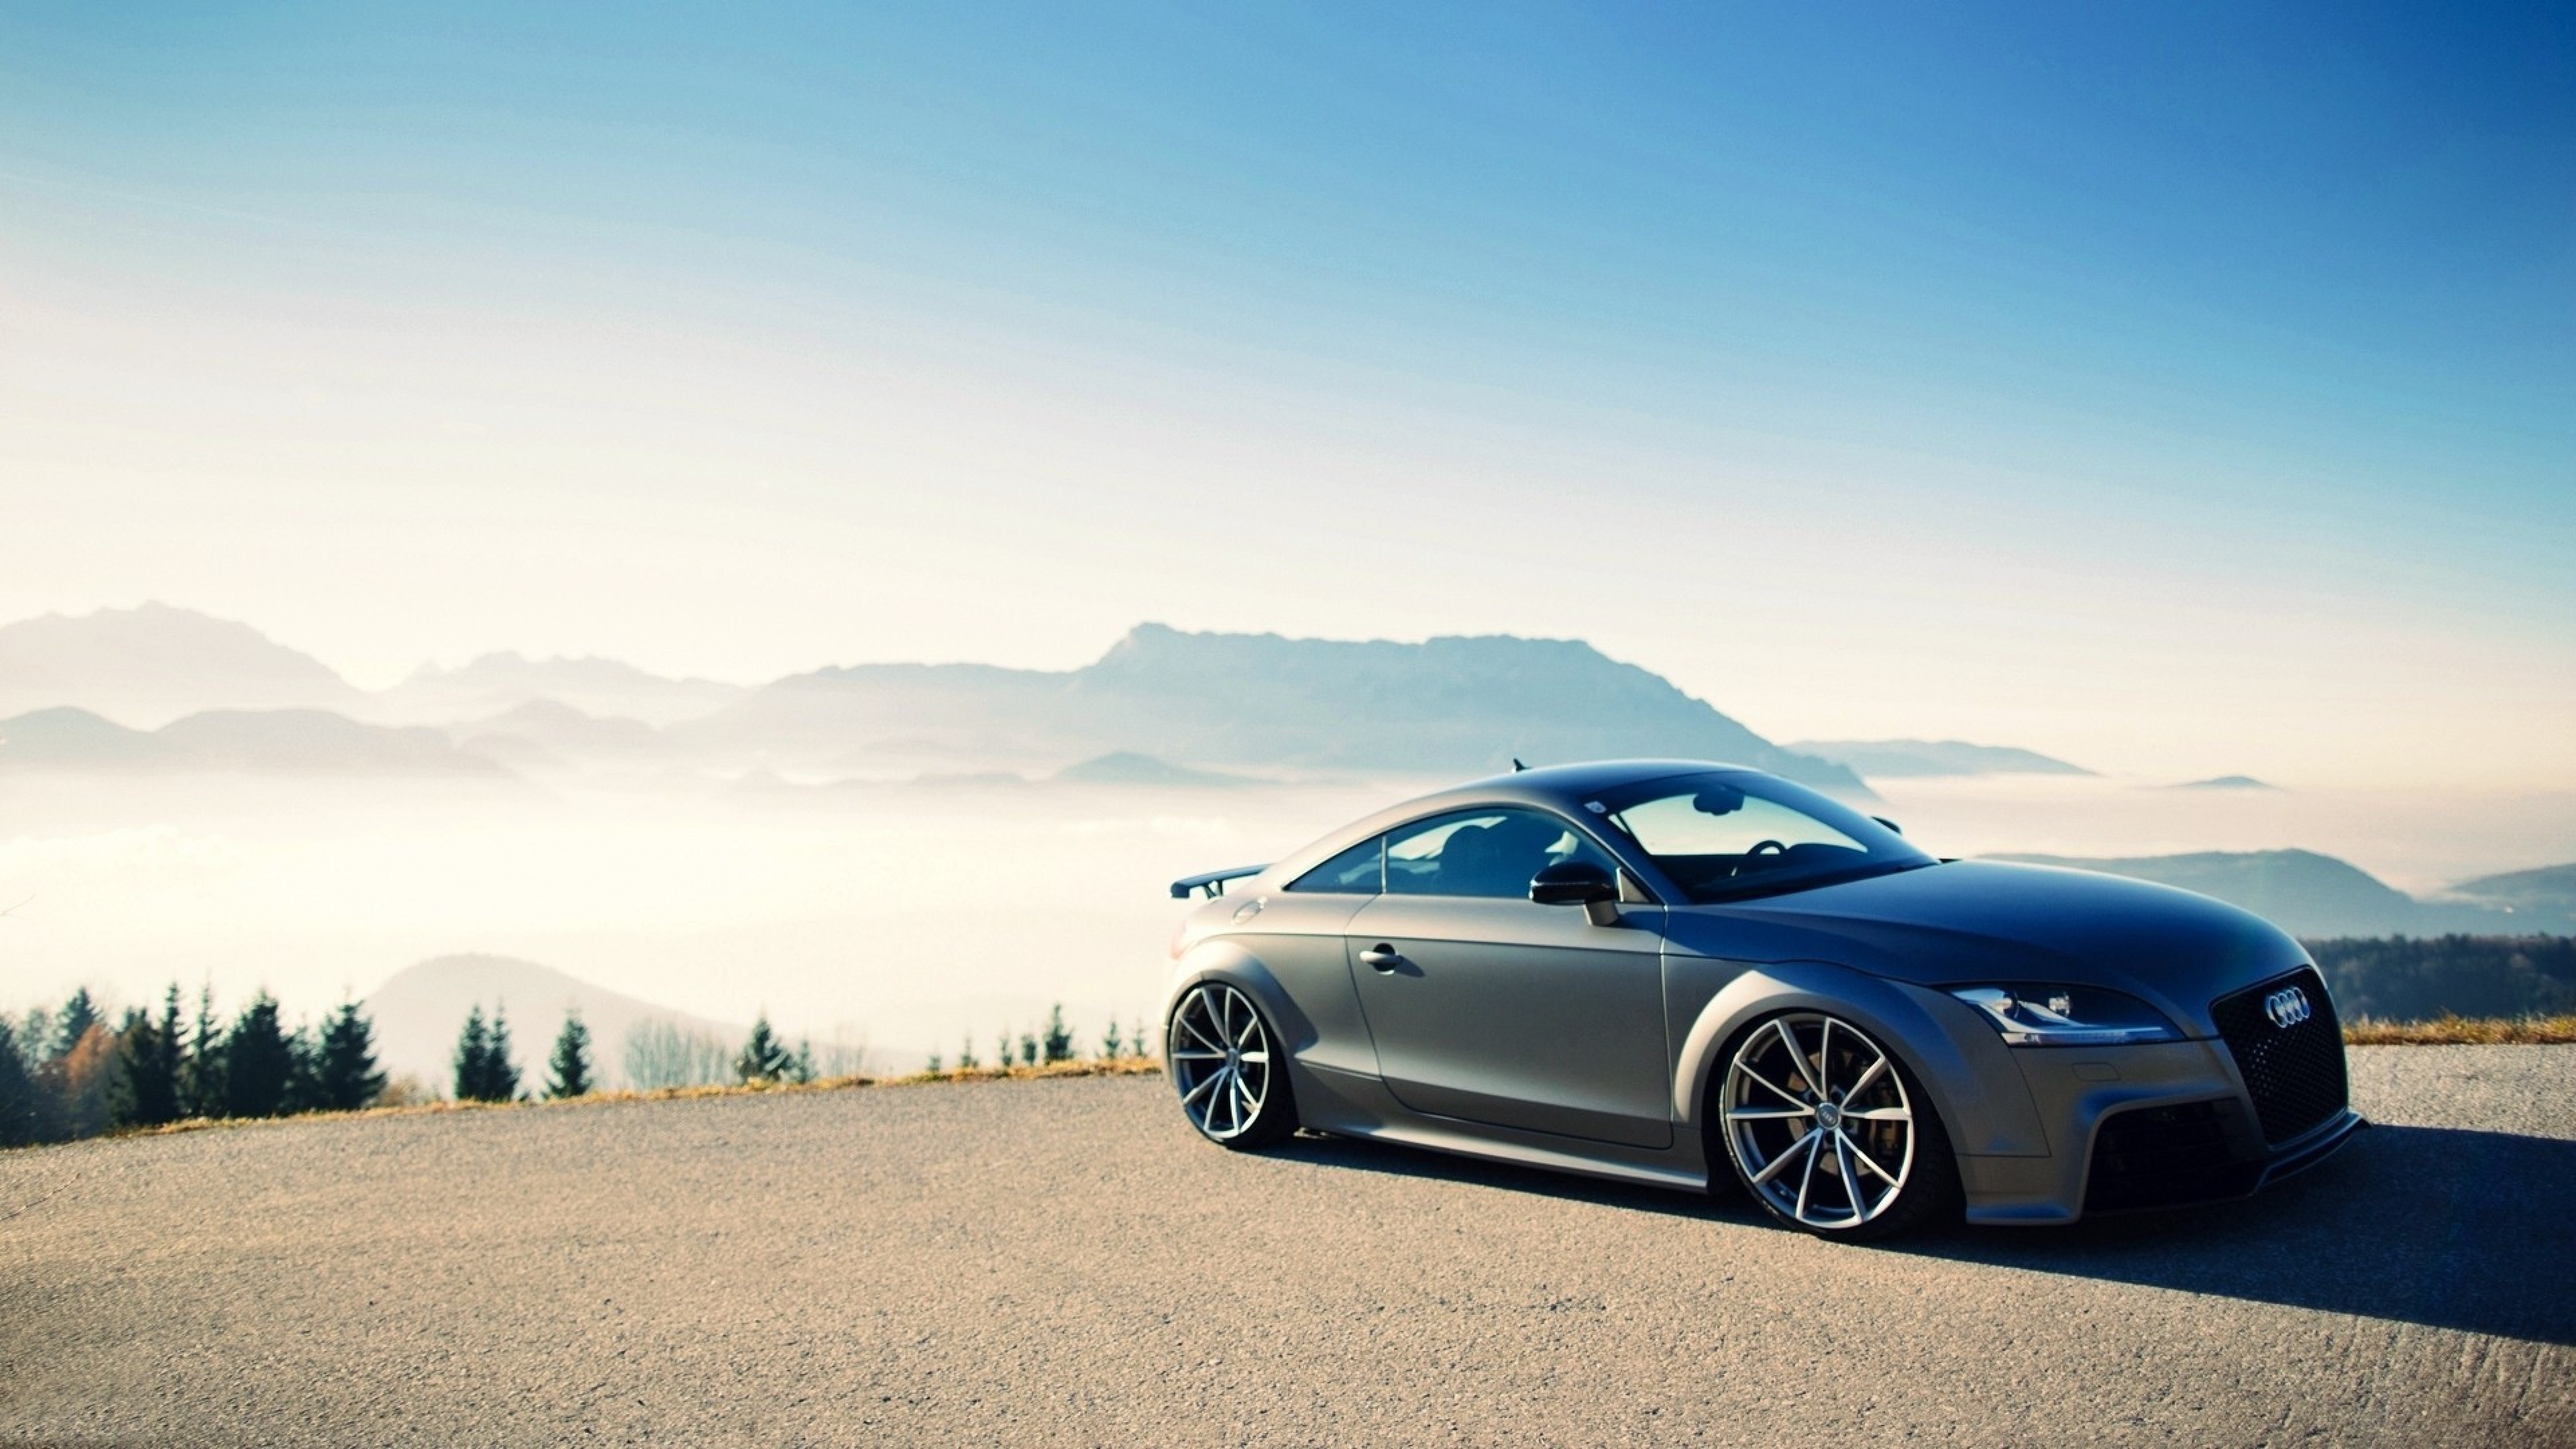 Audi TT RS Coupé 40 Jahre quattro 2020 3 4K 5K HD Cars Wallpapers  HD  Wallpapers  ID 46338